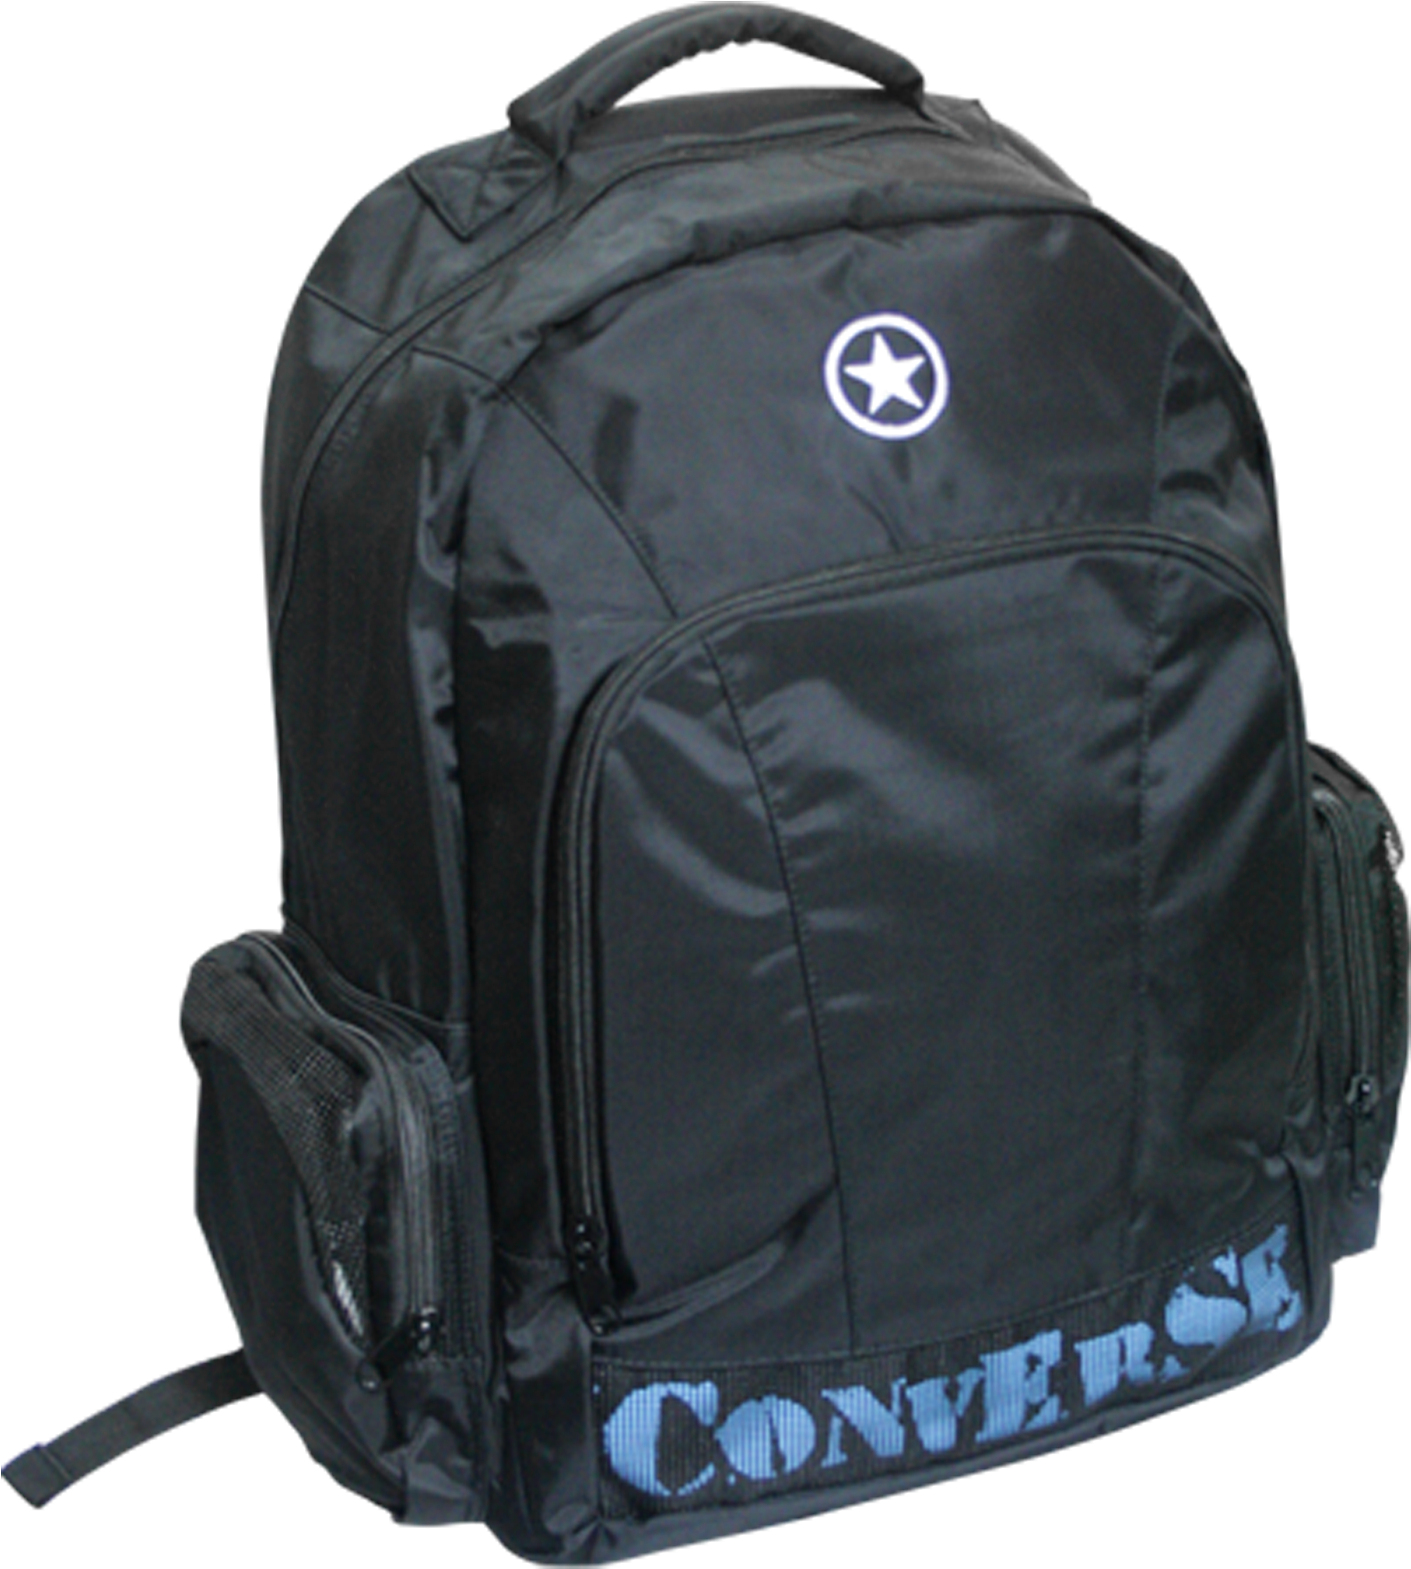 Converse Black Backpack Png Image - Portable Network Graphics (1440x1600), Png Download